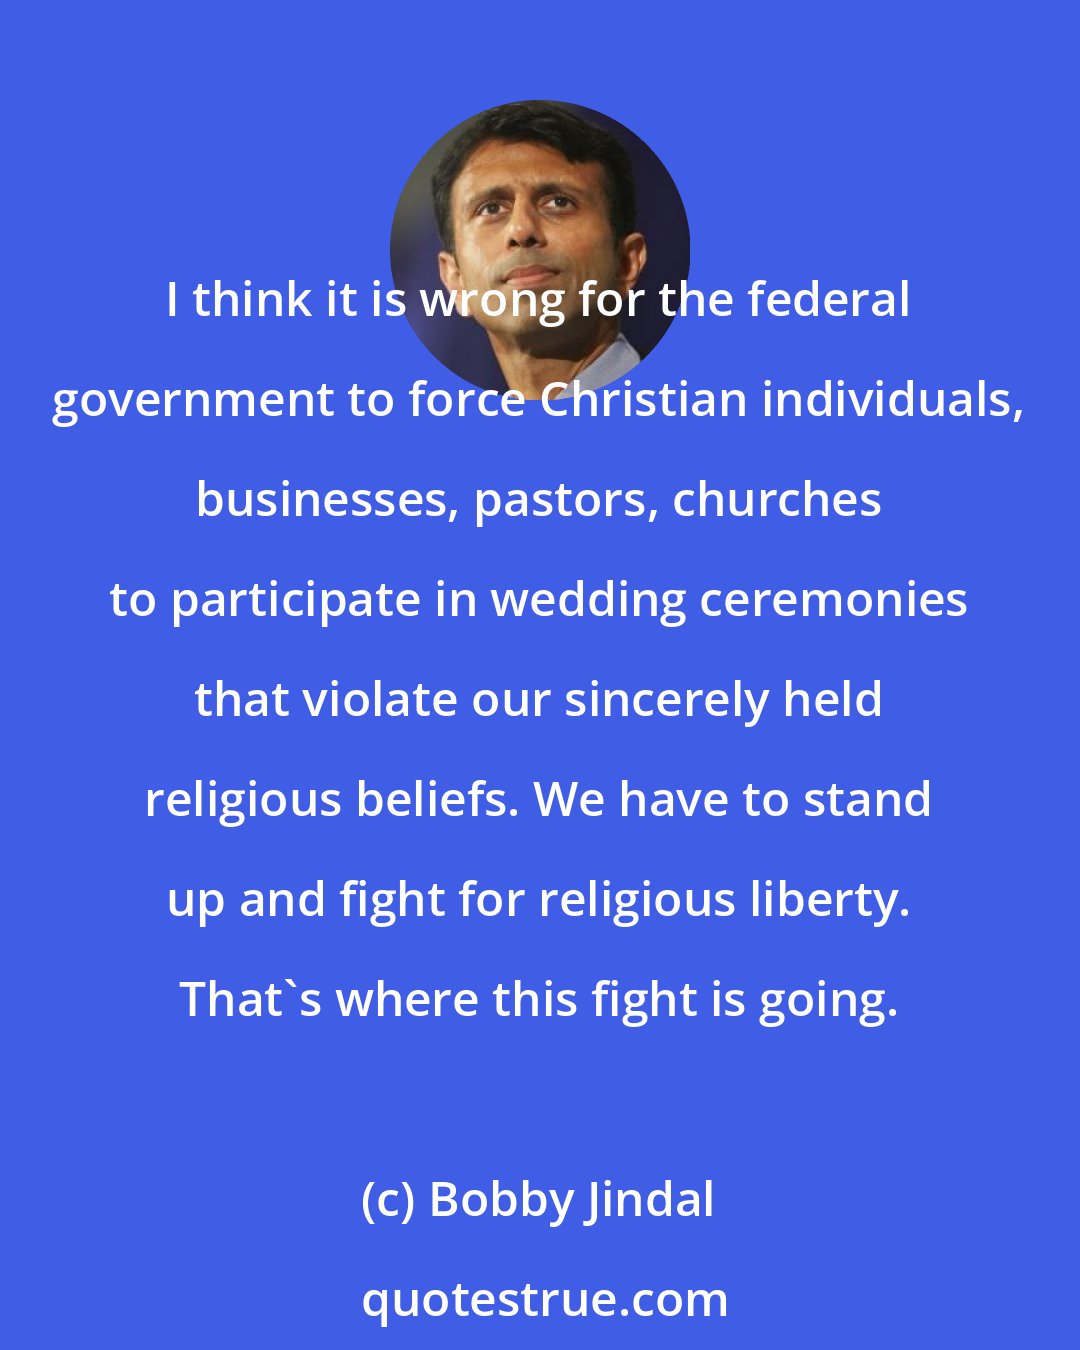 Bobby Jindal: I think it is wrong for the federal government to force Christian individuals, businesses, pastors, churches to participate in wedding ceremonies that violate our sincerely held religious beliefs. We have to stand up and fight for religious liberty. That's where this fight is going.